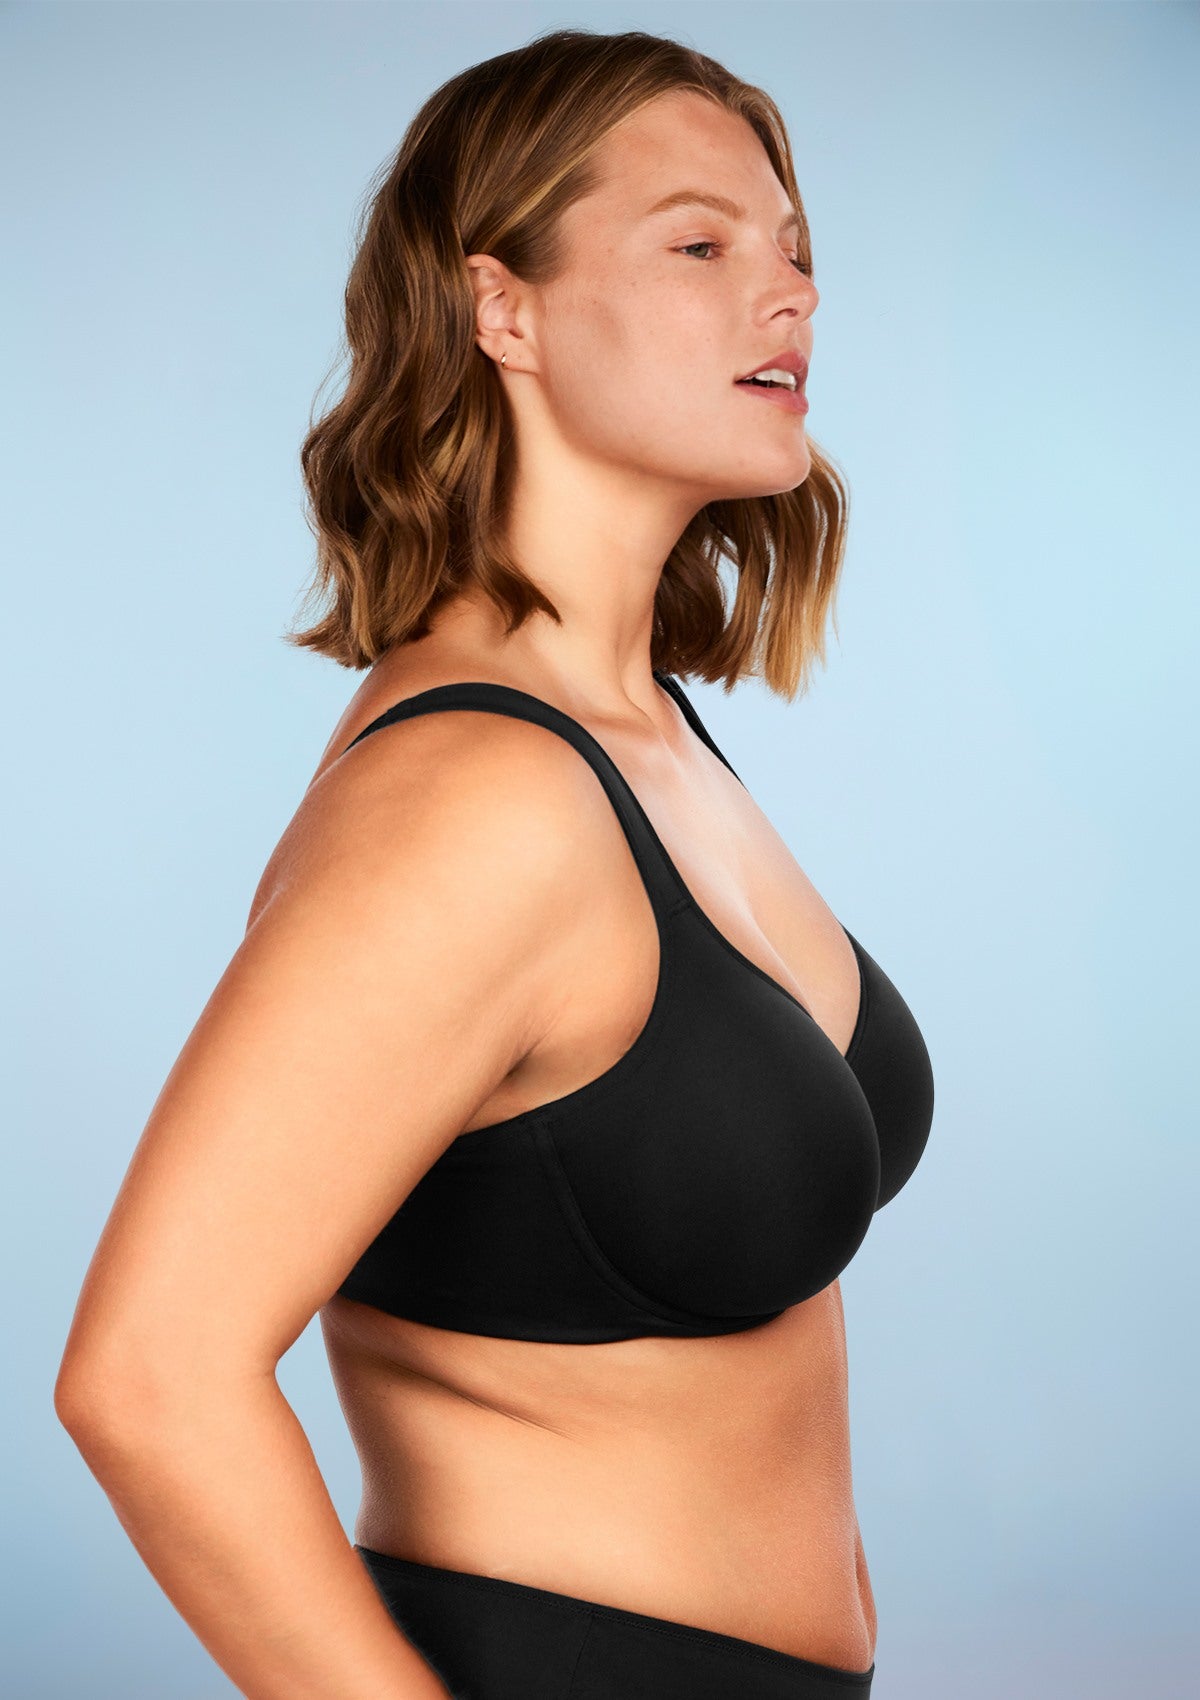 HSIA Joan Soft T-shirt Unlined Non-Padded Soft Cup Minimizer Bra - Black / 38 / D